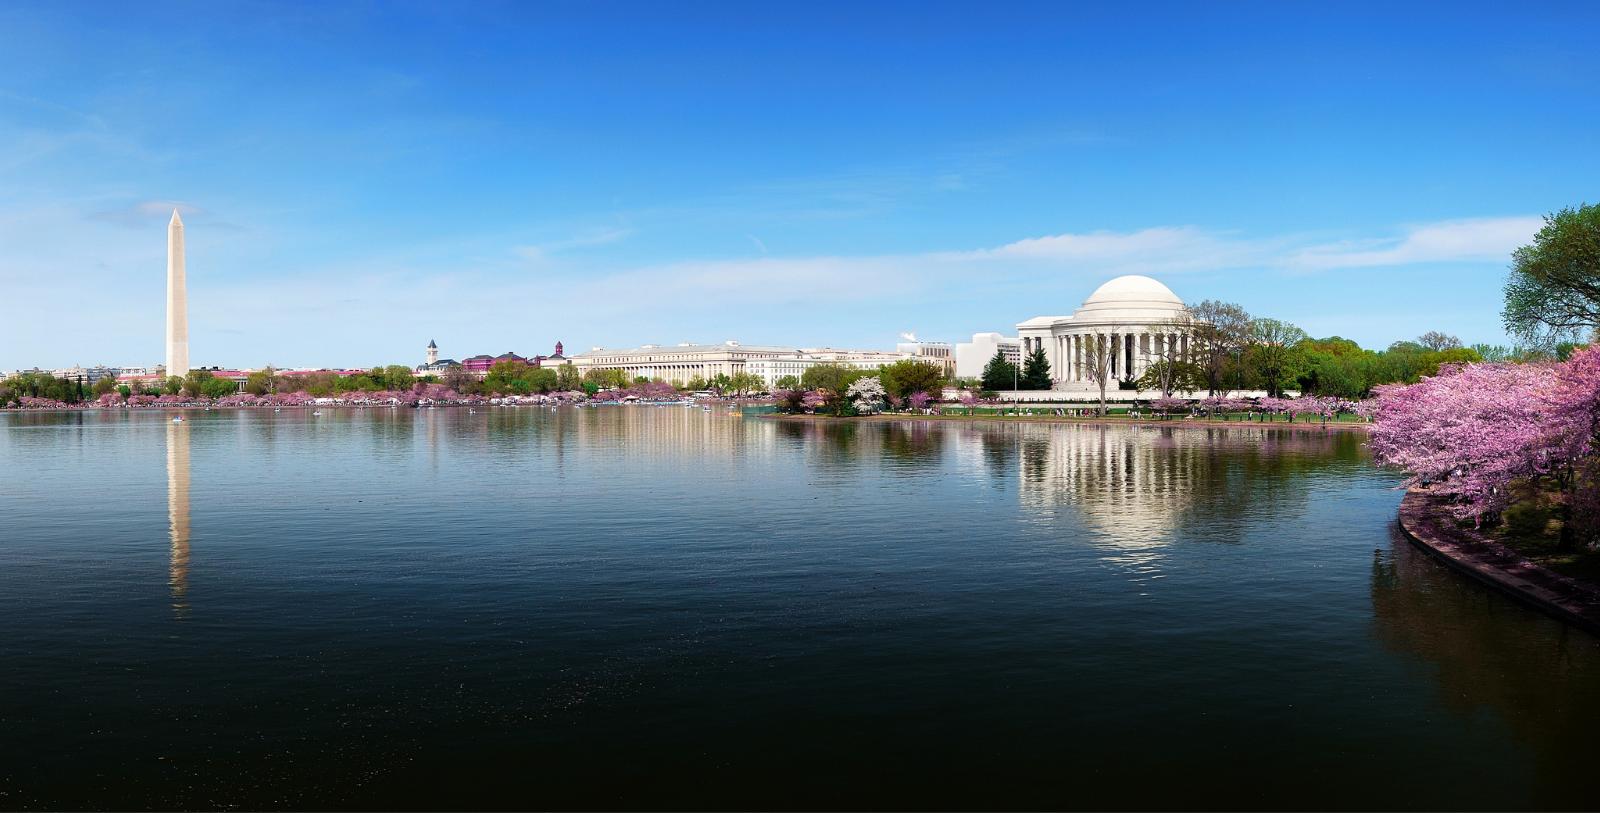 Experience the White House, the Washington Monument, the Franklin Delano Roosevelt Memorial, and the National Mall just moments away.